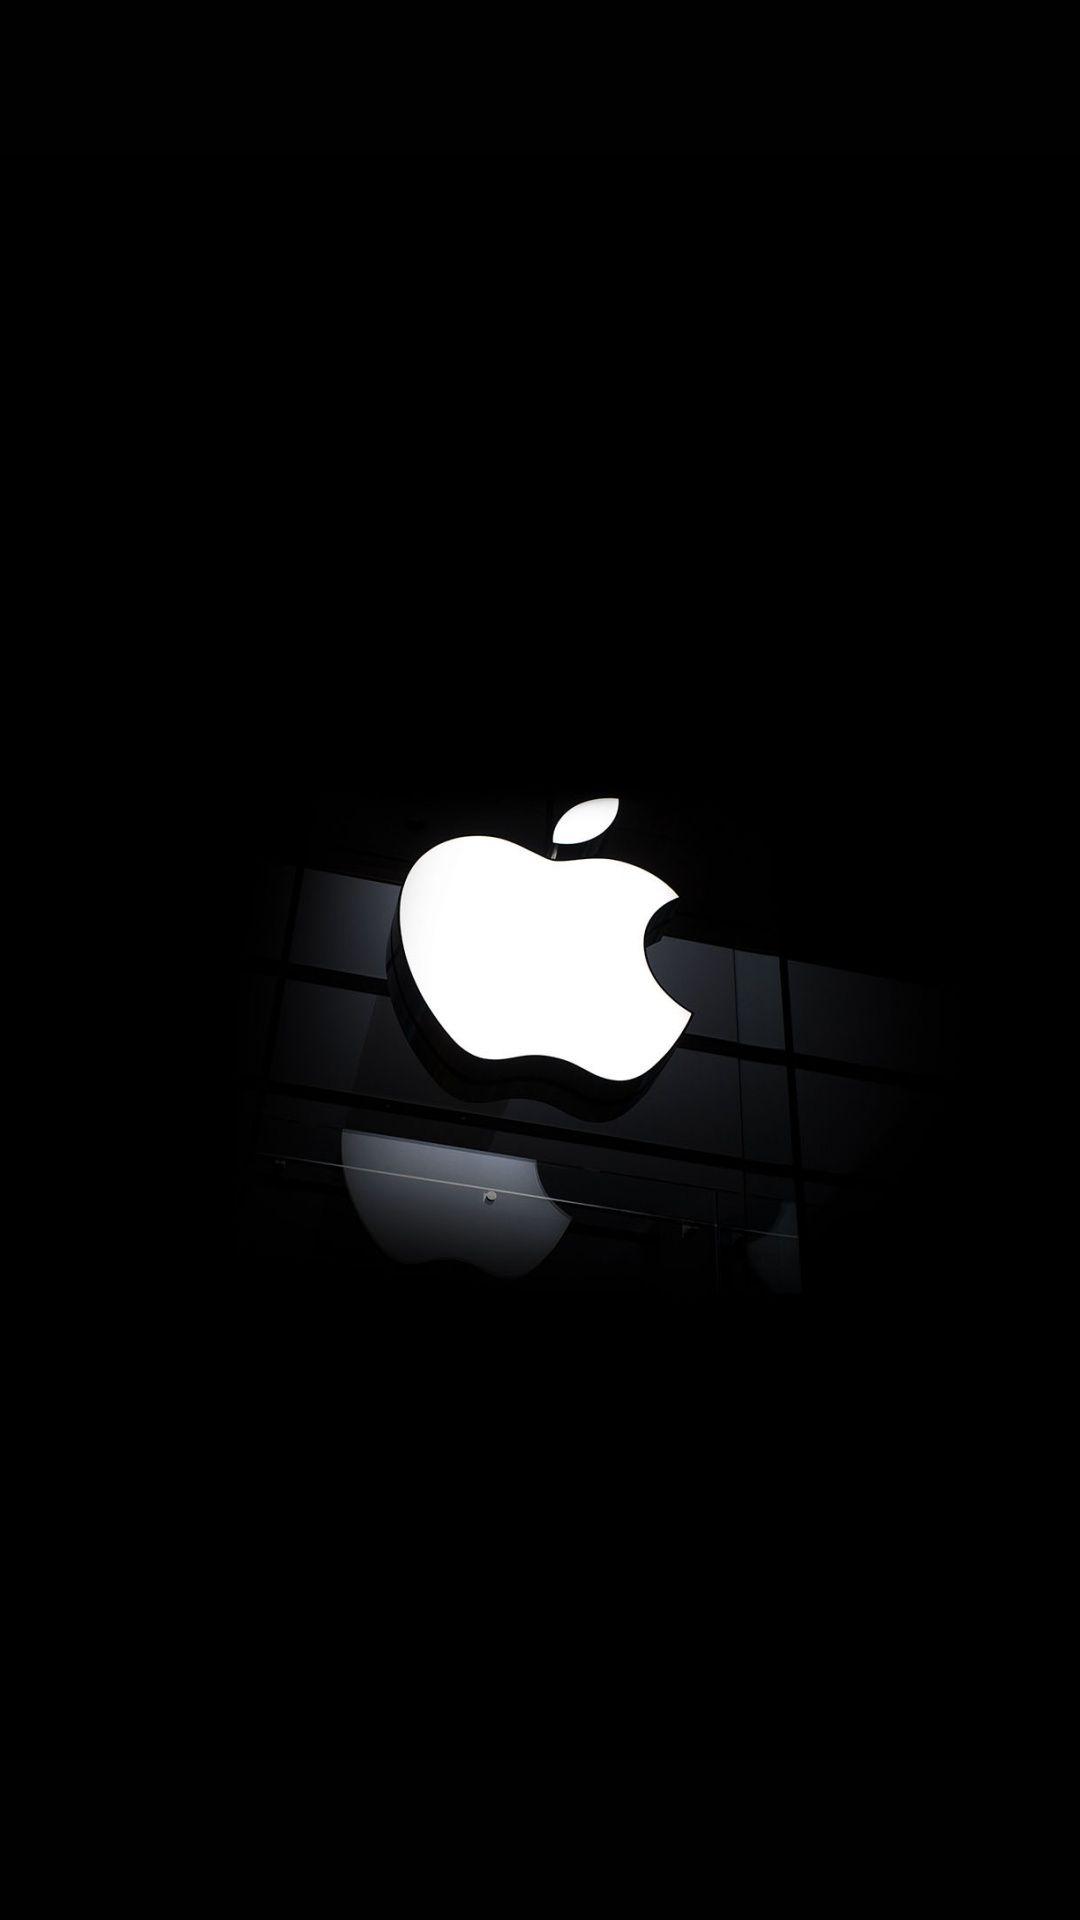 Apple 1080 x 1920 Wallpaper available for free download. Apple